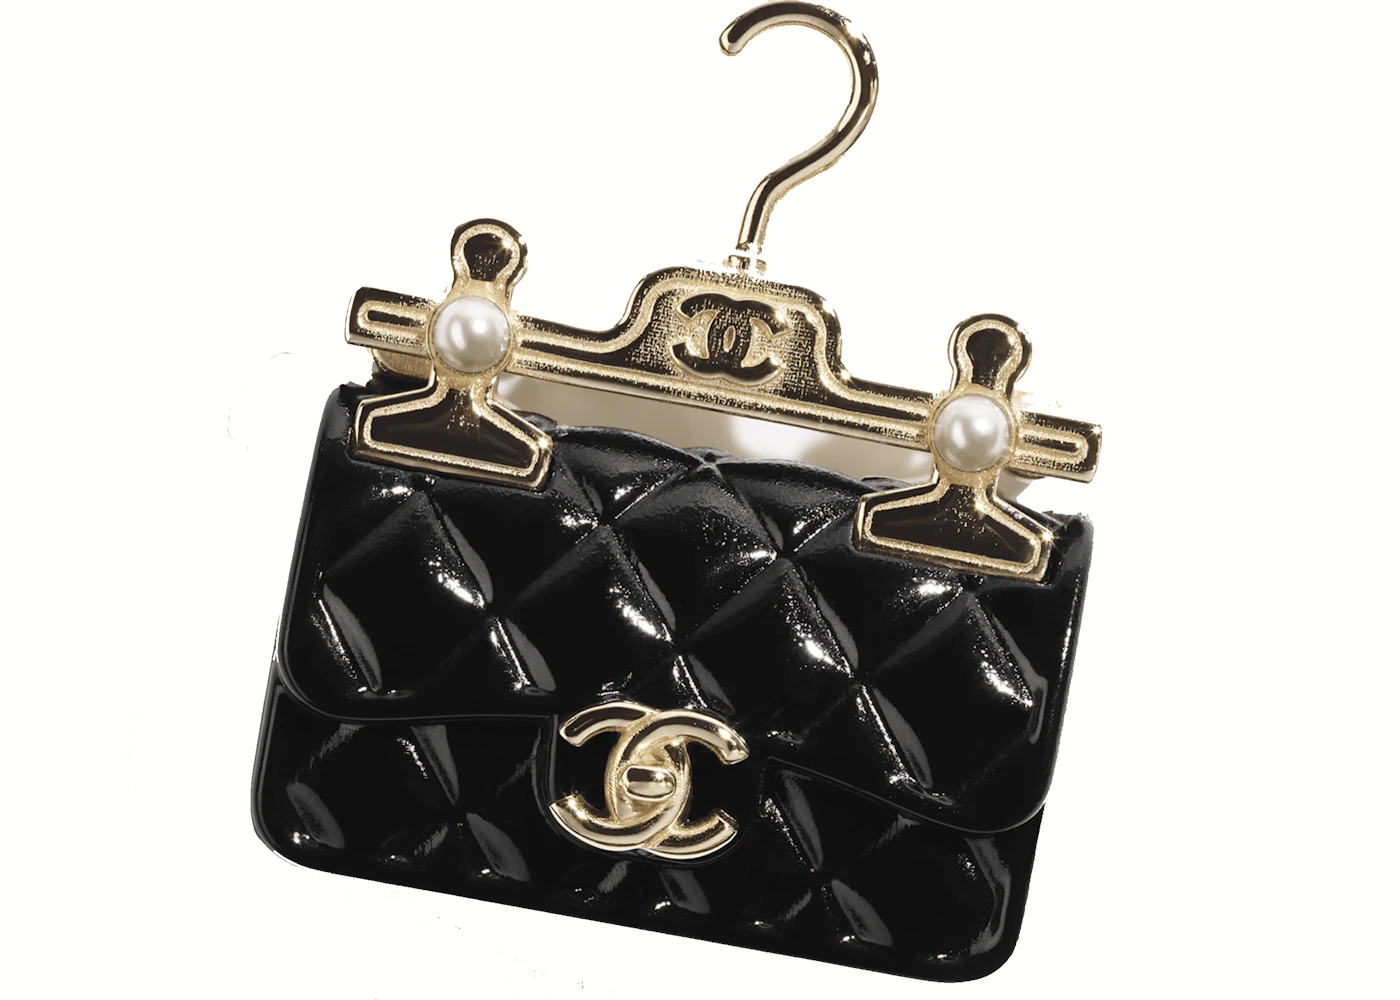 Chanel 19 Brooch Gold/White in Metal/Glass - US